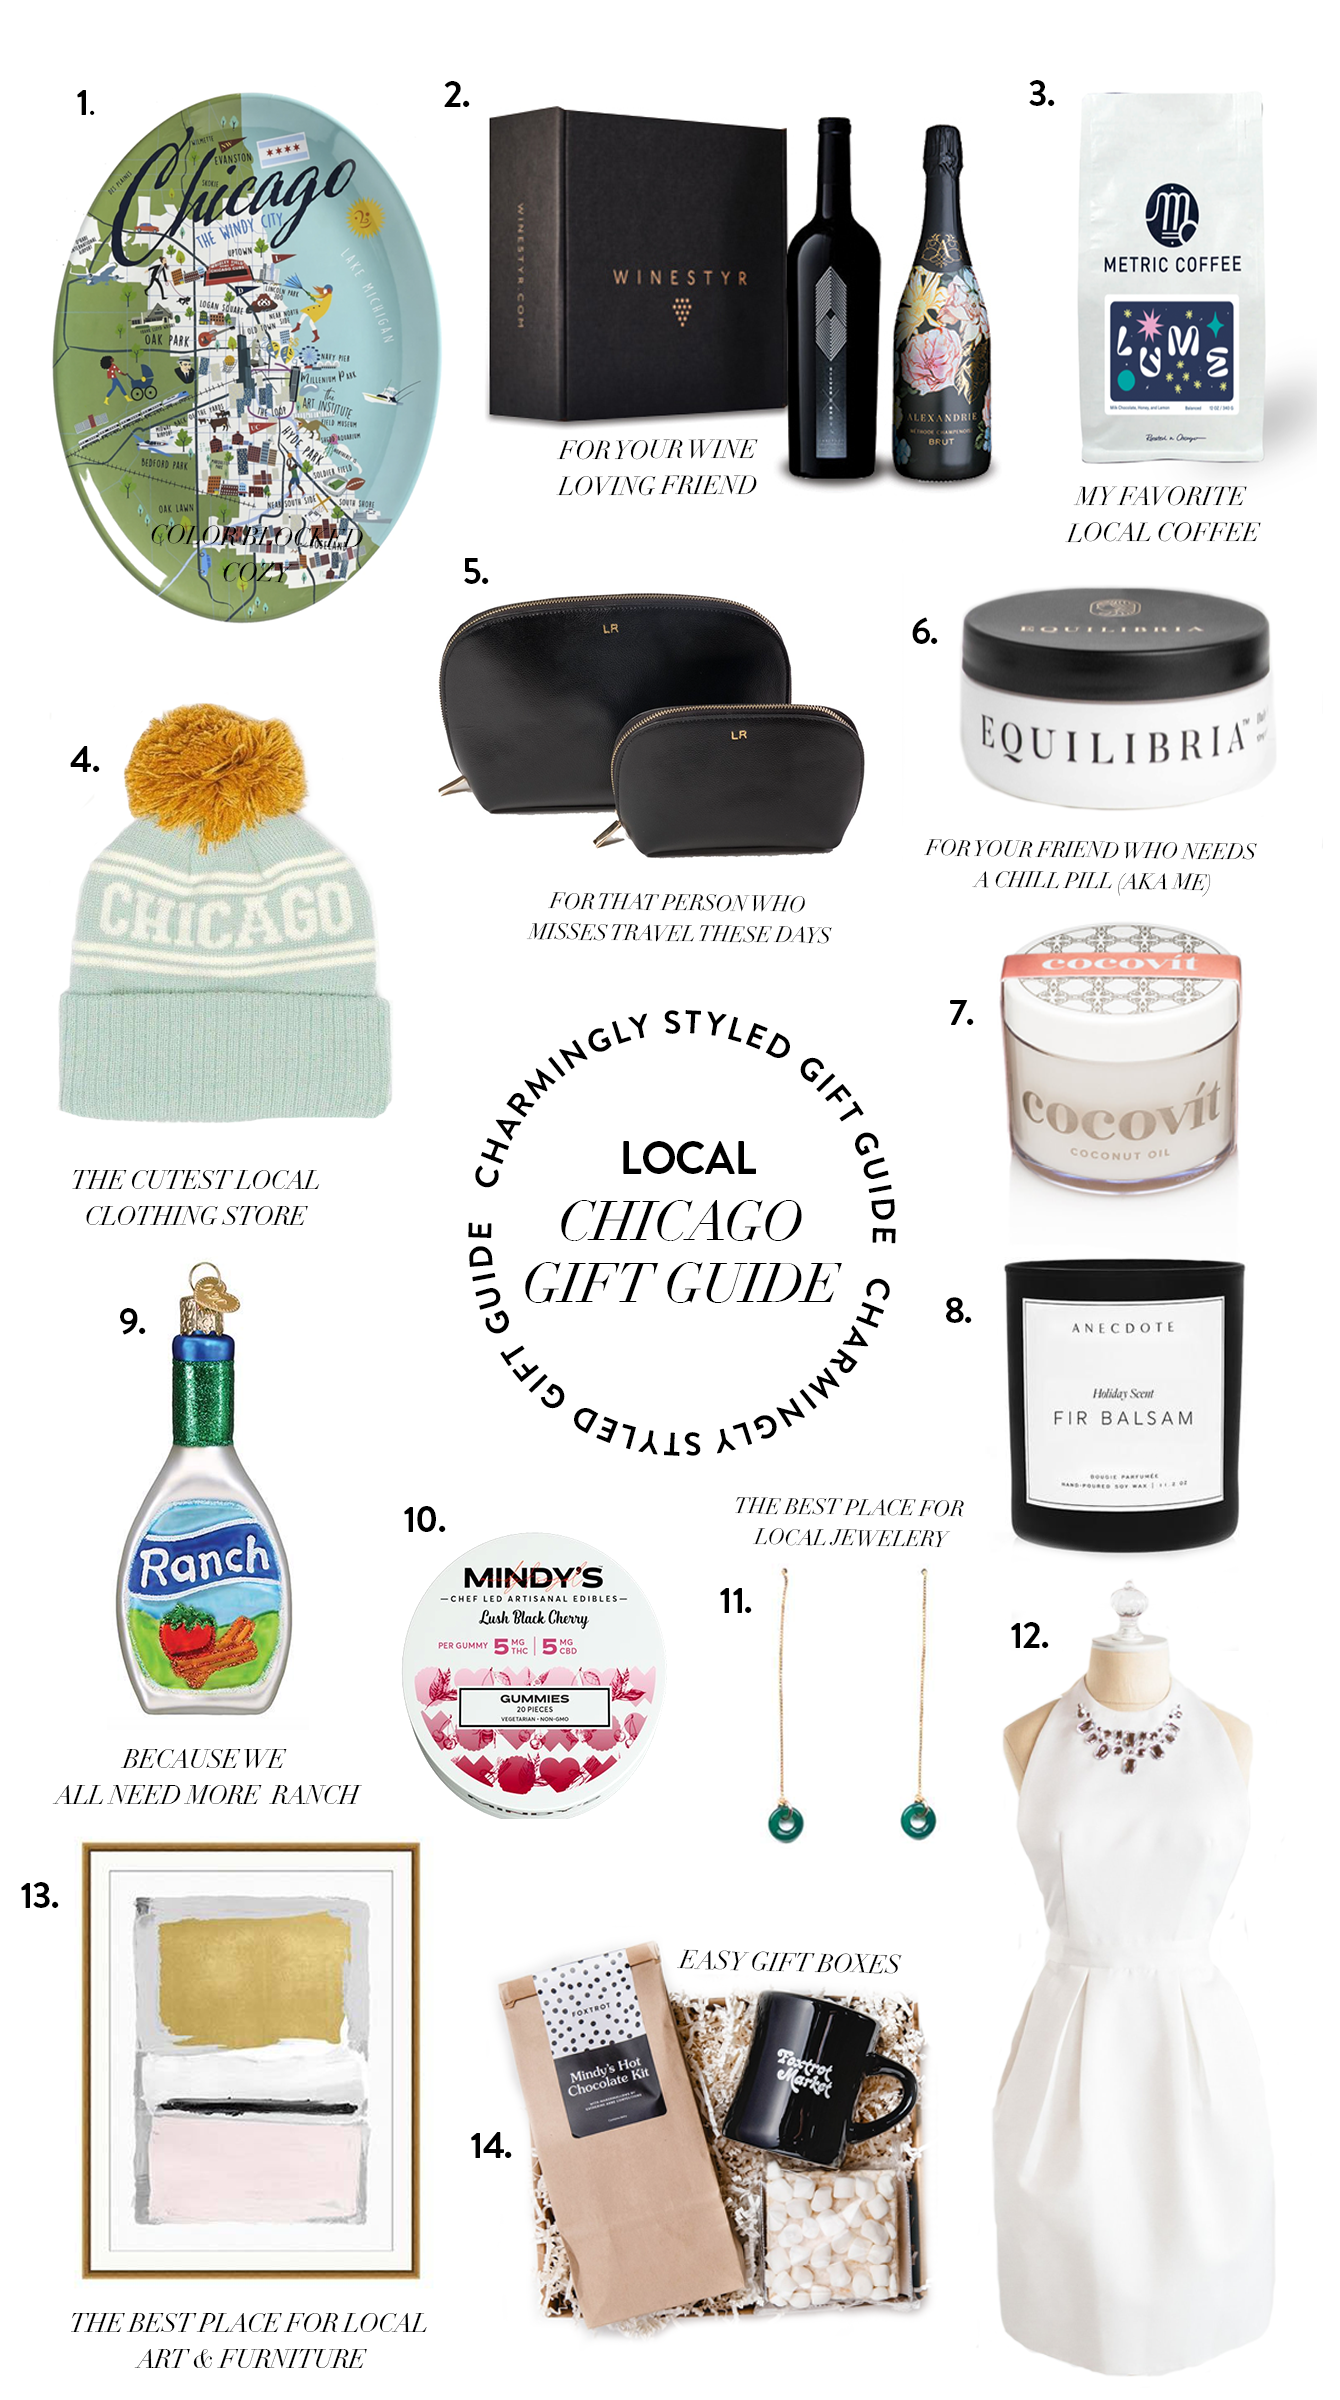 Christmas shopping: Find local gifts for everyone on your list